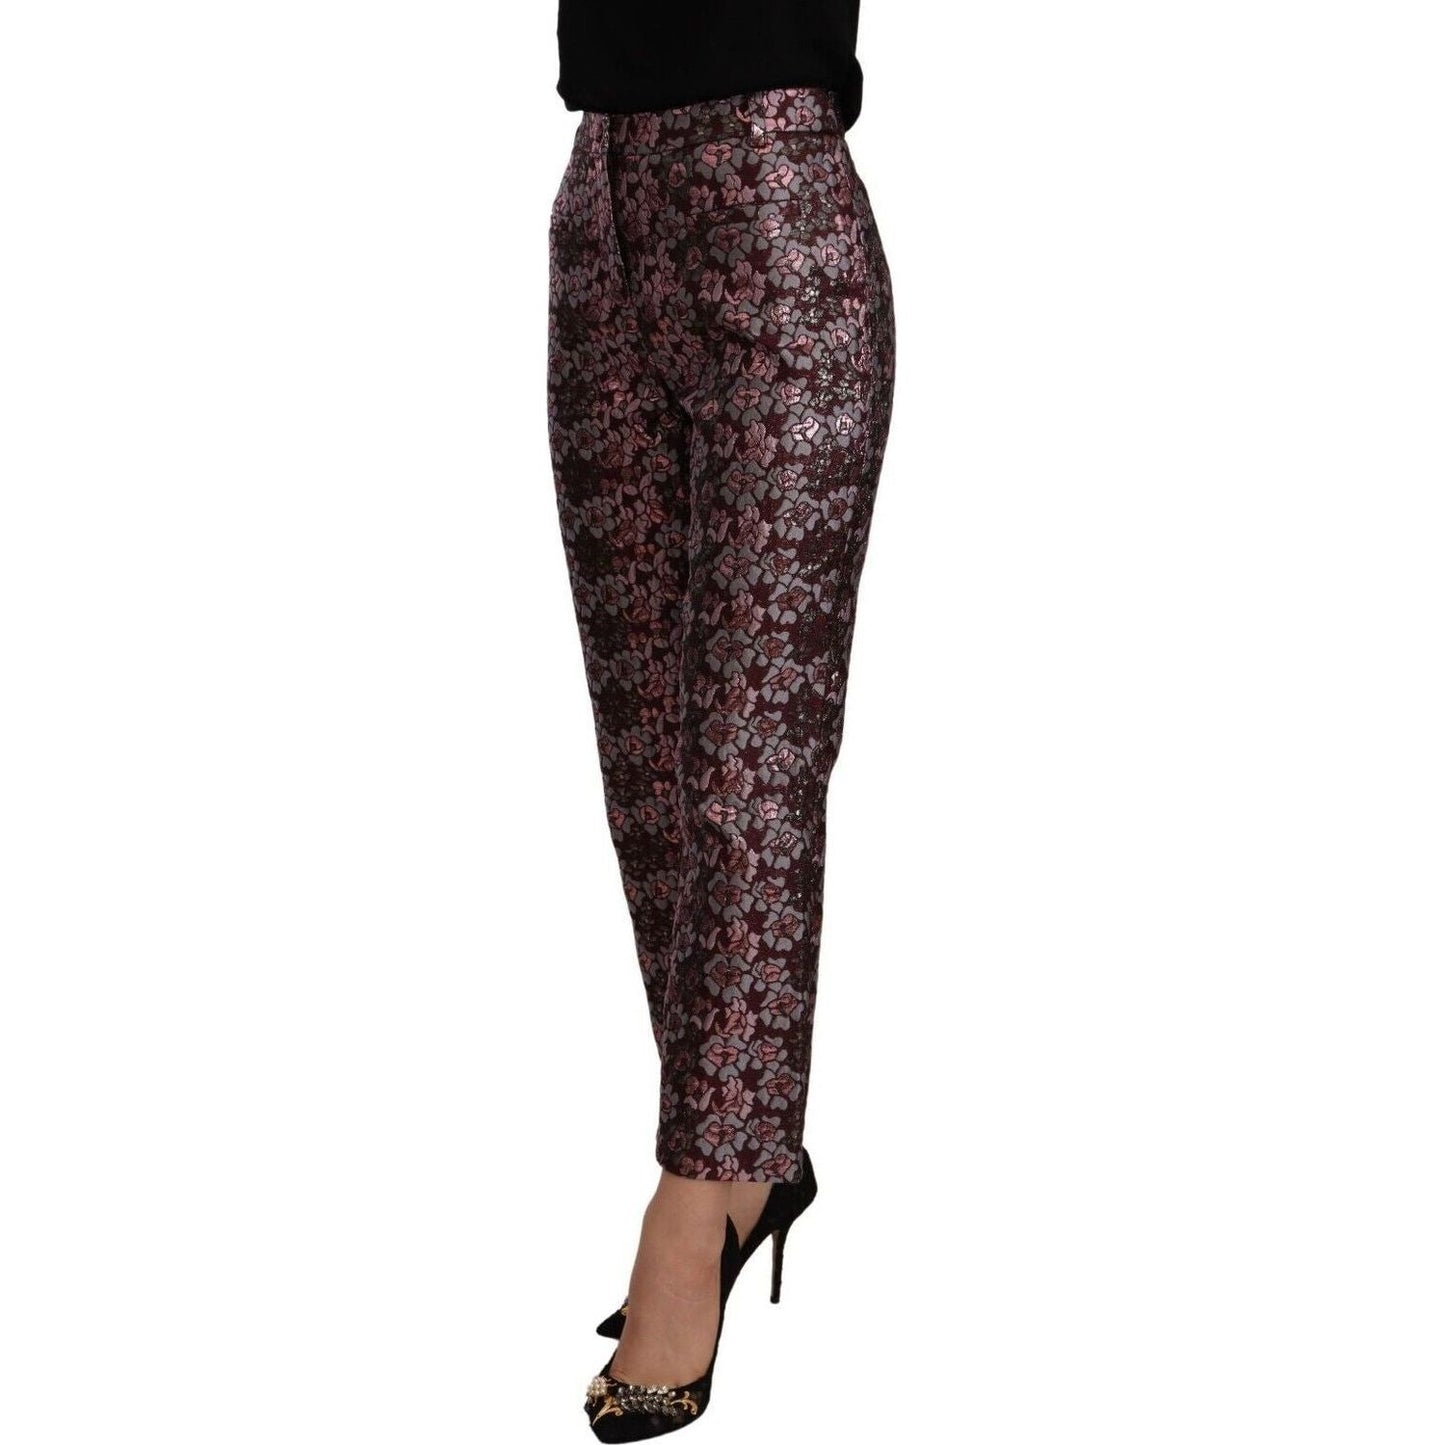 House of Holland High Waist Jacquard Flared Cropped Trousers multicolor-floral-jacquard-flared-cropped-pants s-l1600-1-121-a65636d5-c07.jpg